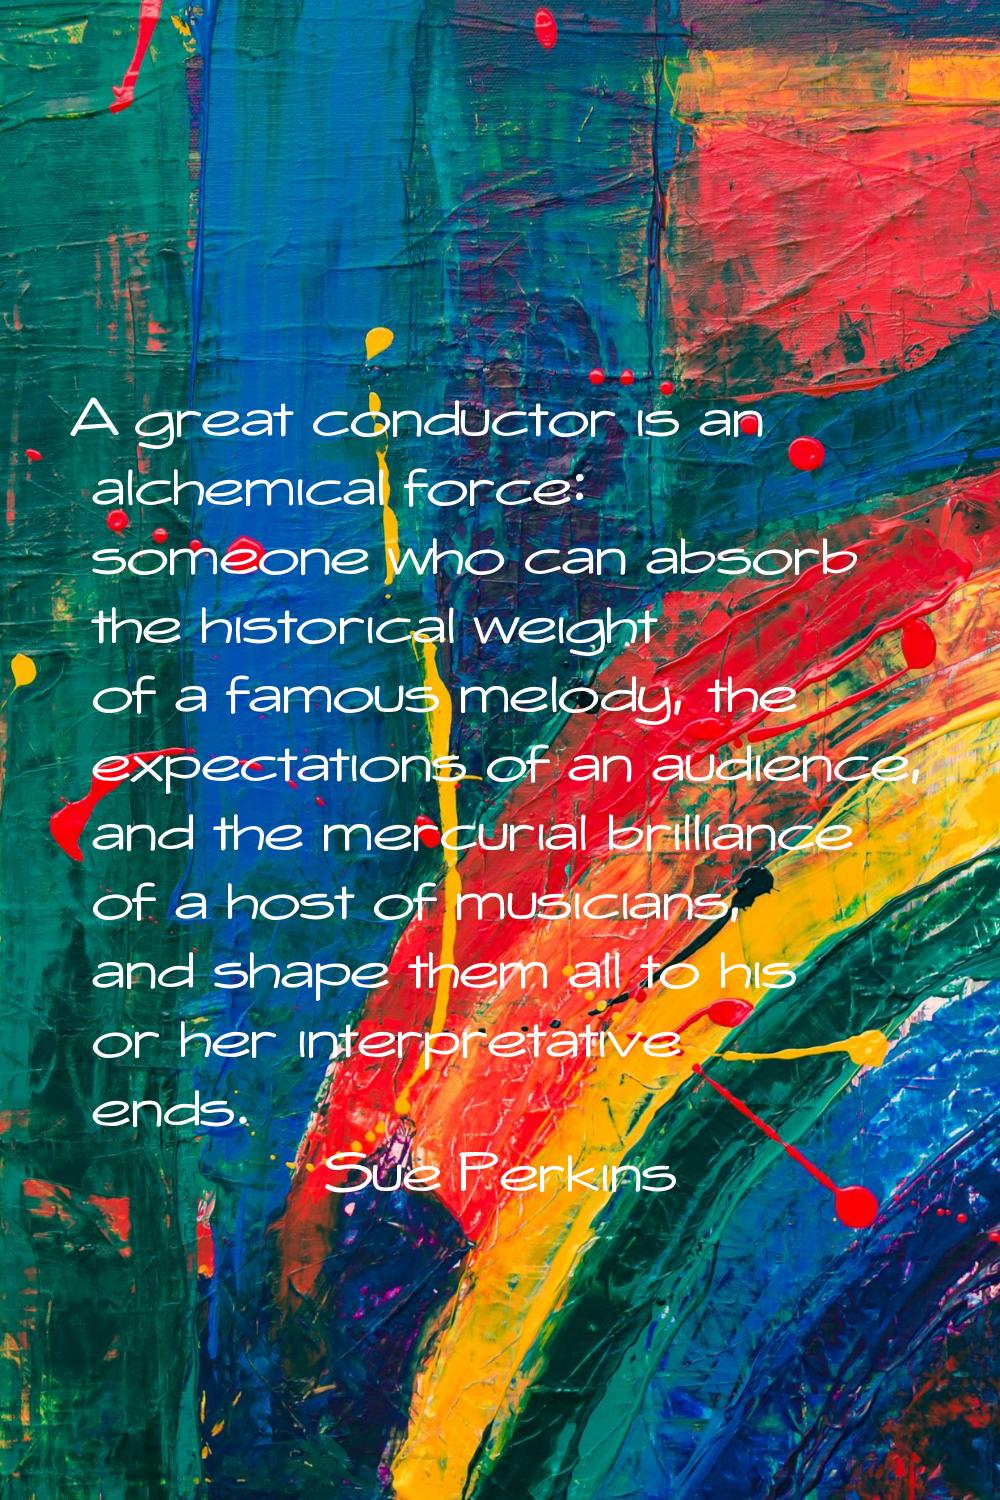 A great conductor is an alchemical force: someone who can absorb the historical weight of a famous 